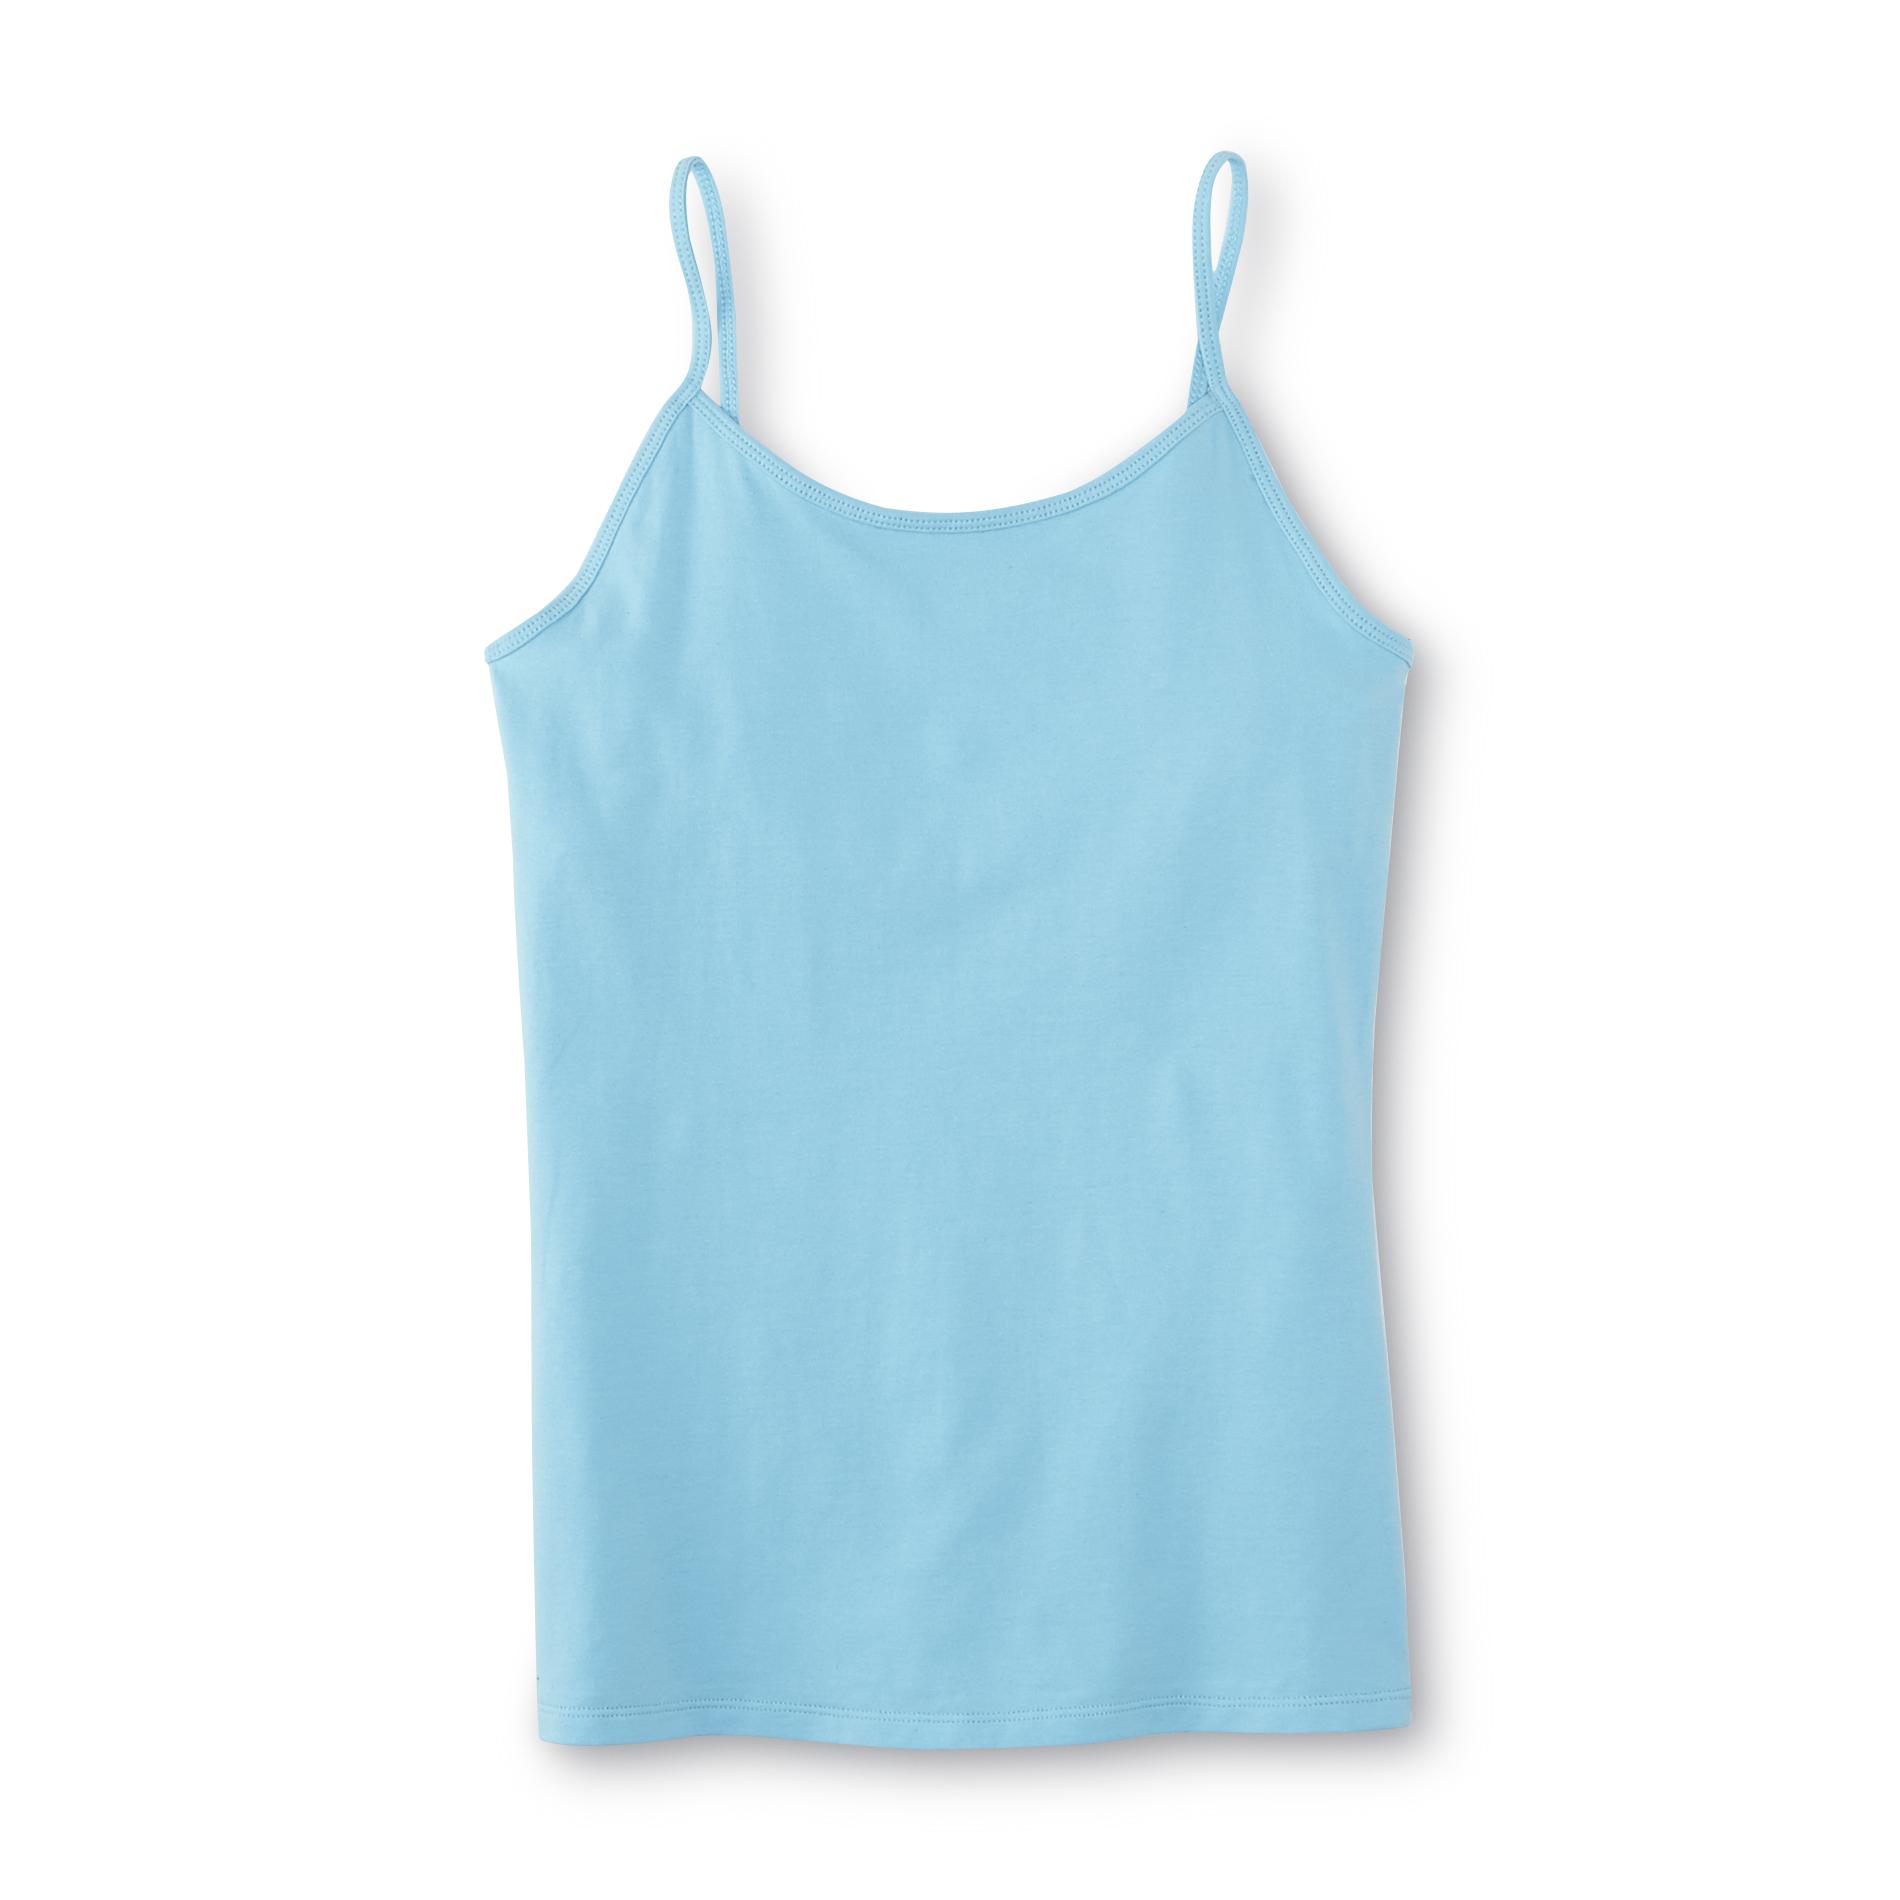 Simply Styled Girl's Camisole